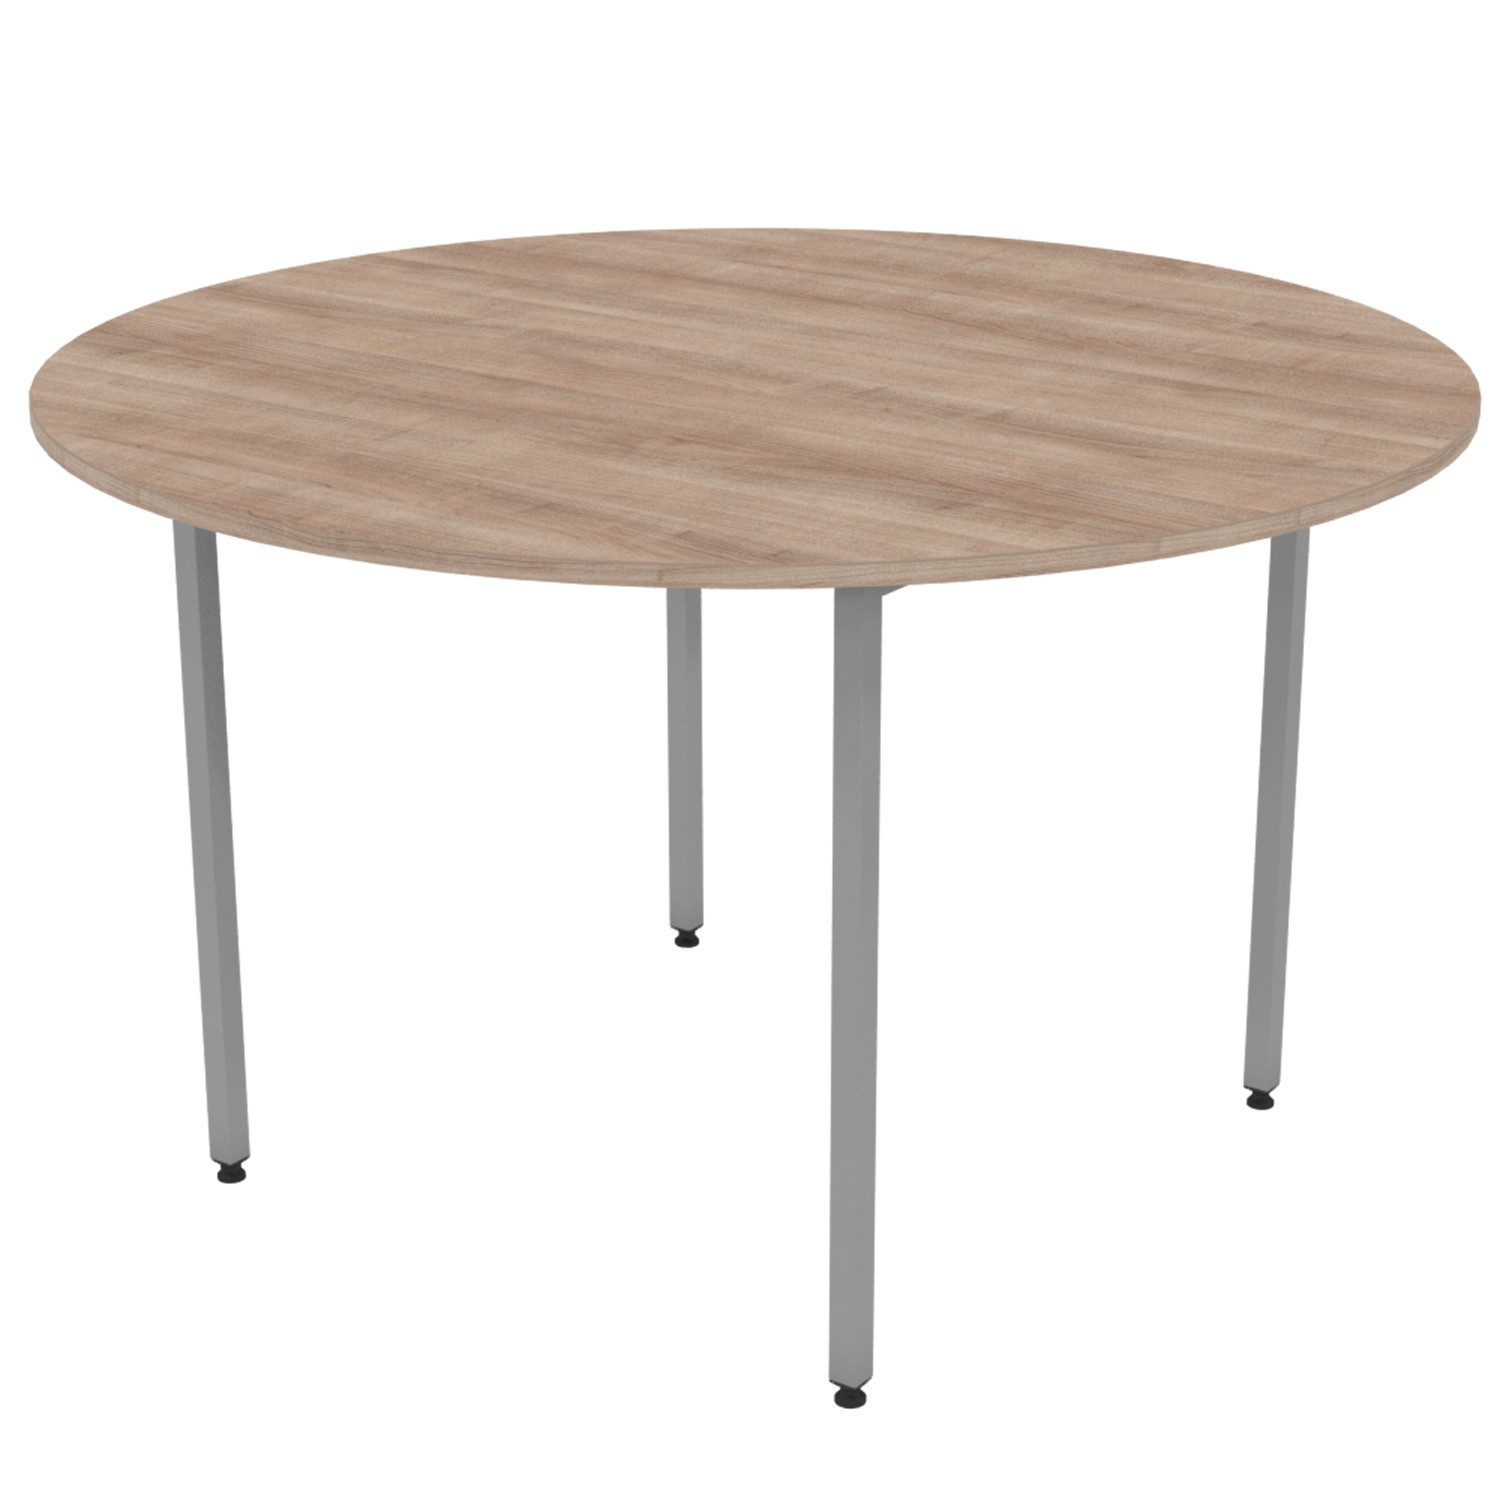 Meeting Table Round